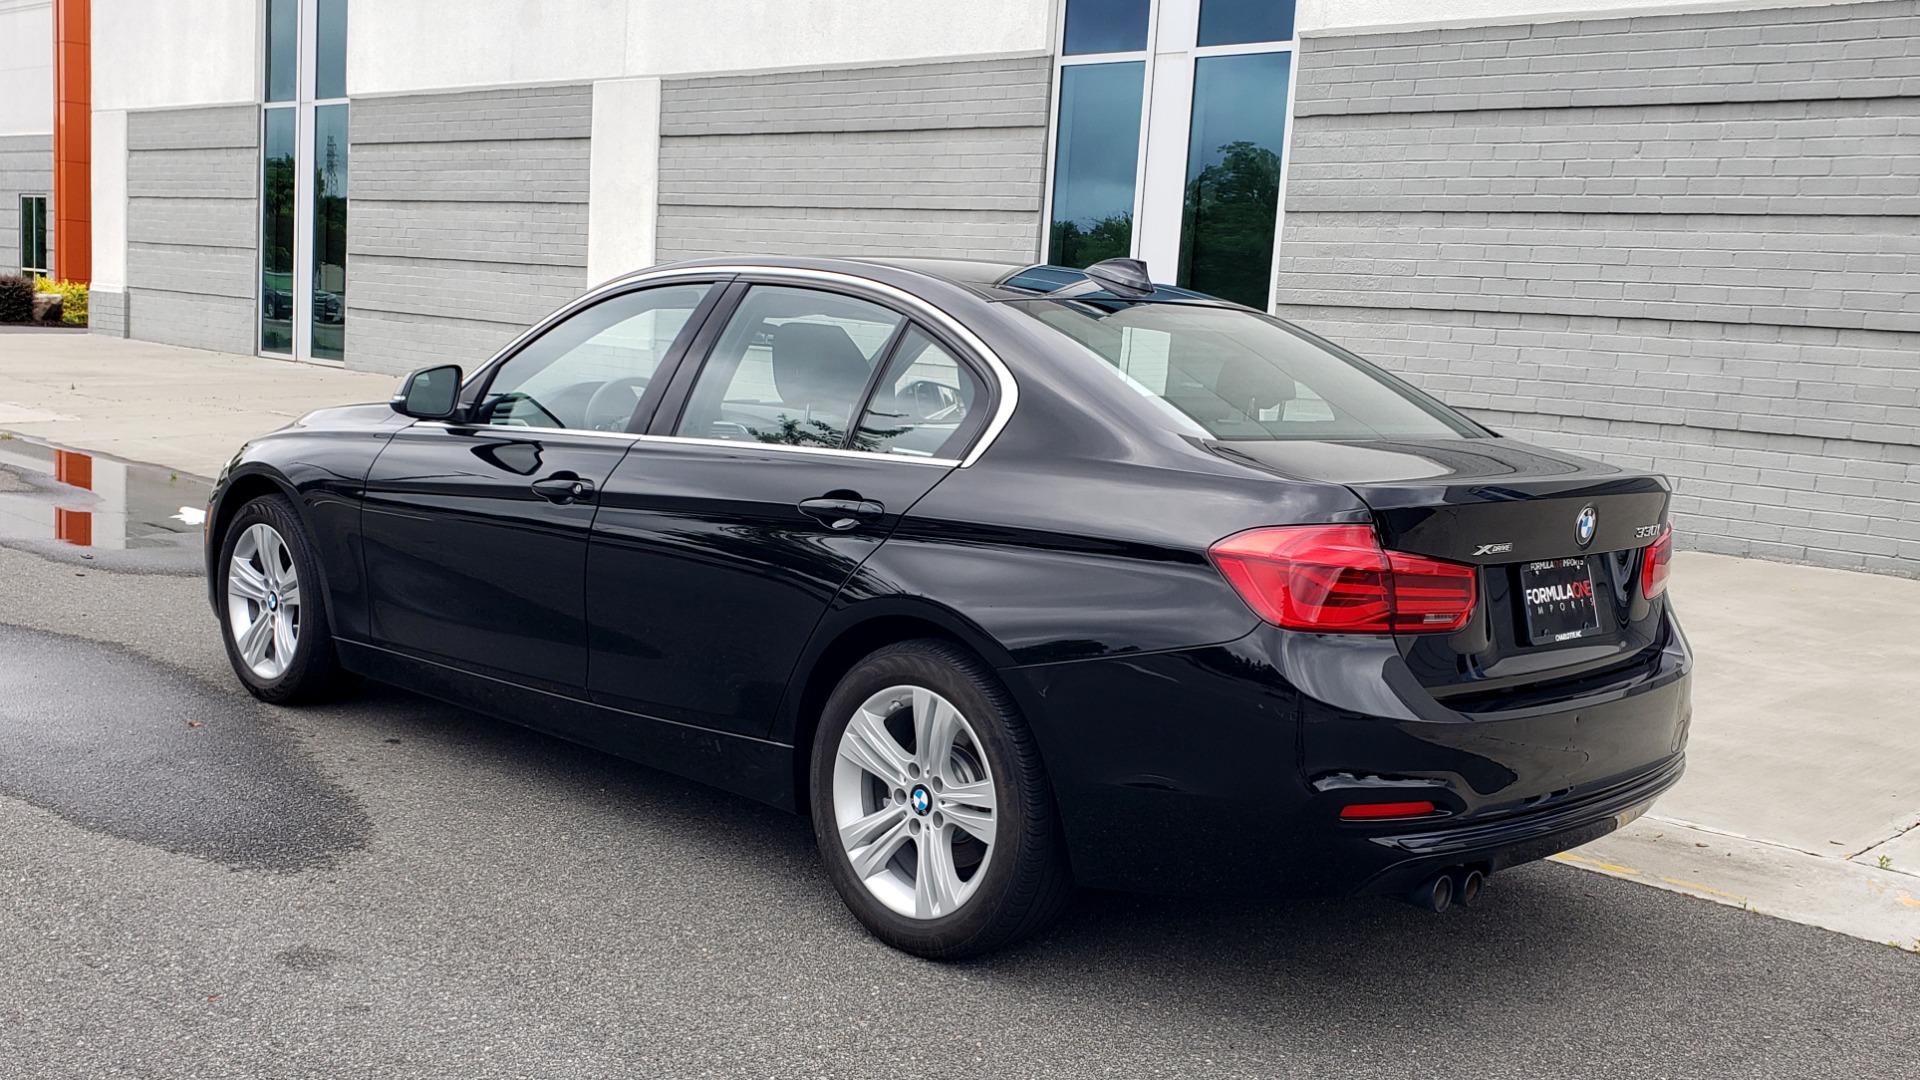 Used 2018 BMW 3 SERIES 330IXDRIVE / CONV PKG / NAV / SUNROOF / HTD STS / REARVIEW for sale Sold at Formula Imports in Charlotte NC 28227 6